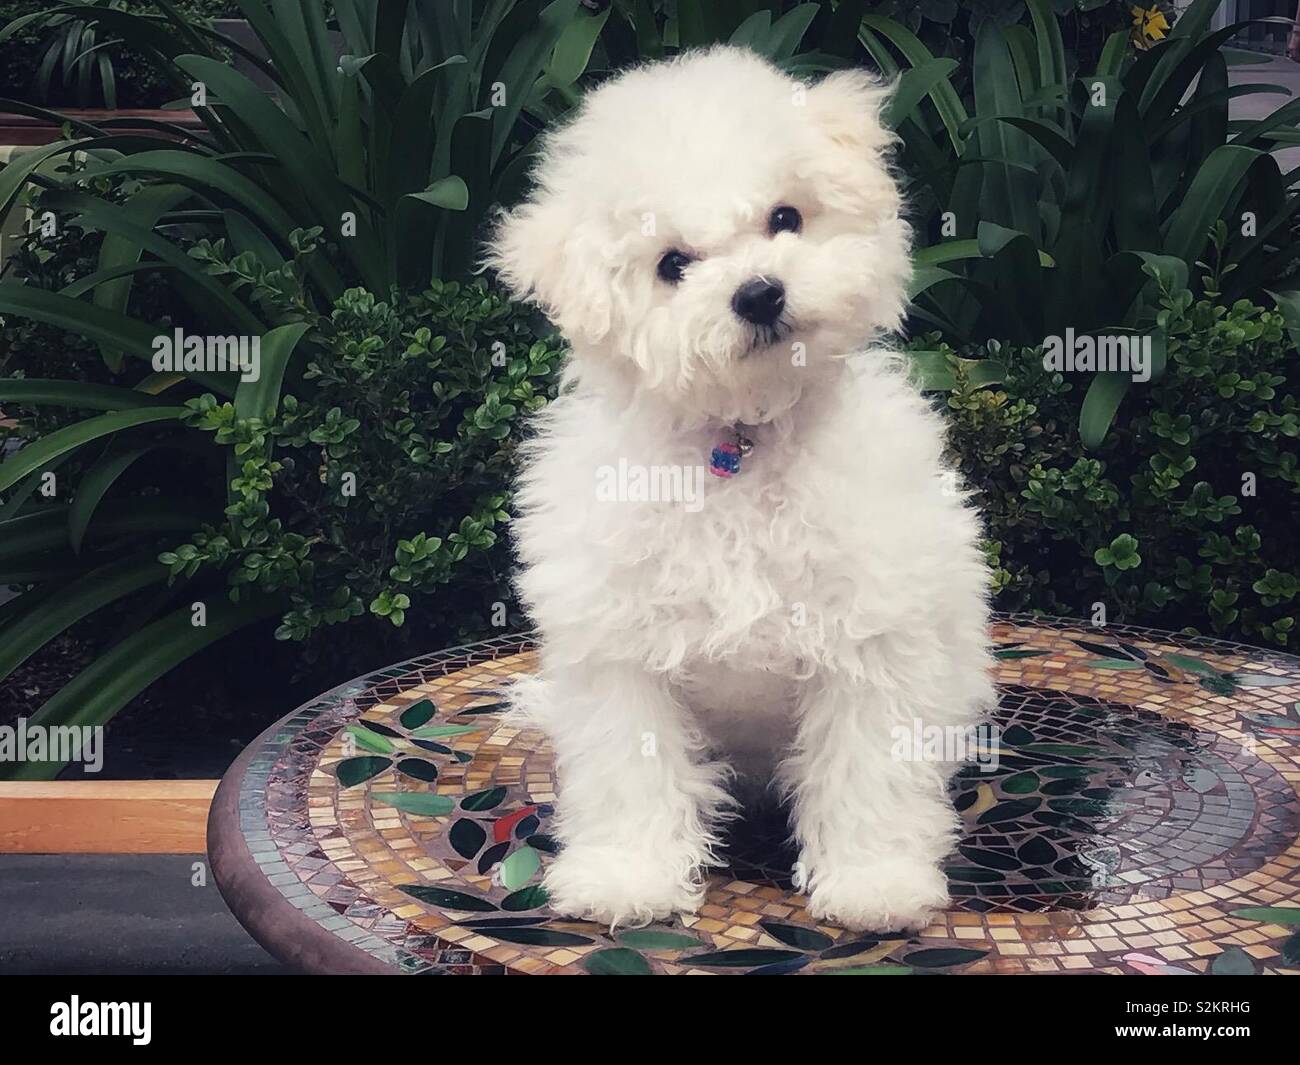 Colorful outdoorsy tones garden setting with mosaic tile table top and white furry puppy sitting upon it. Stock Photo